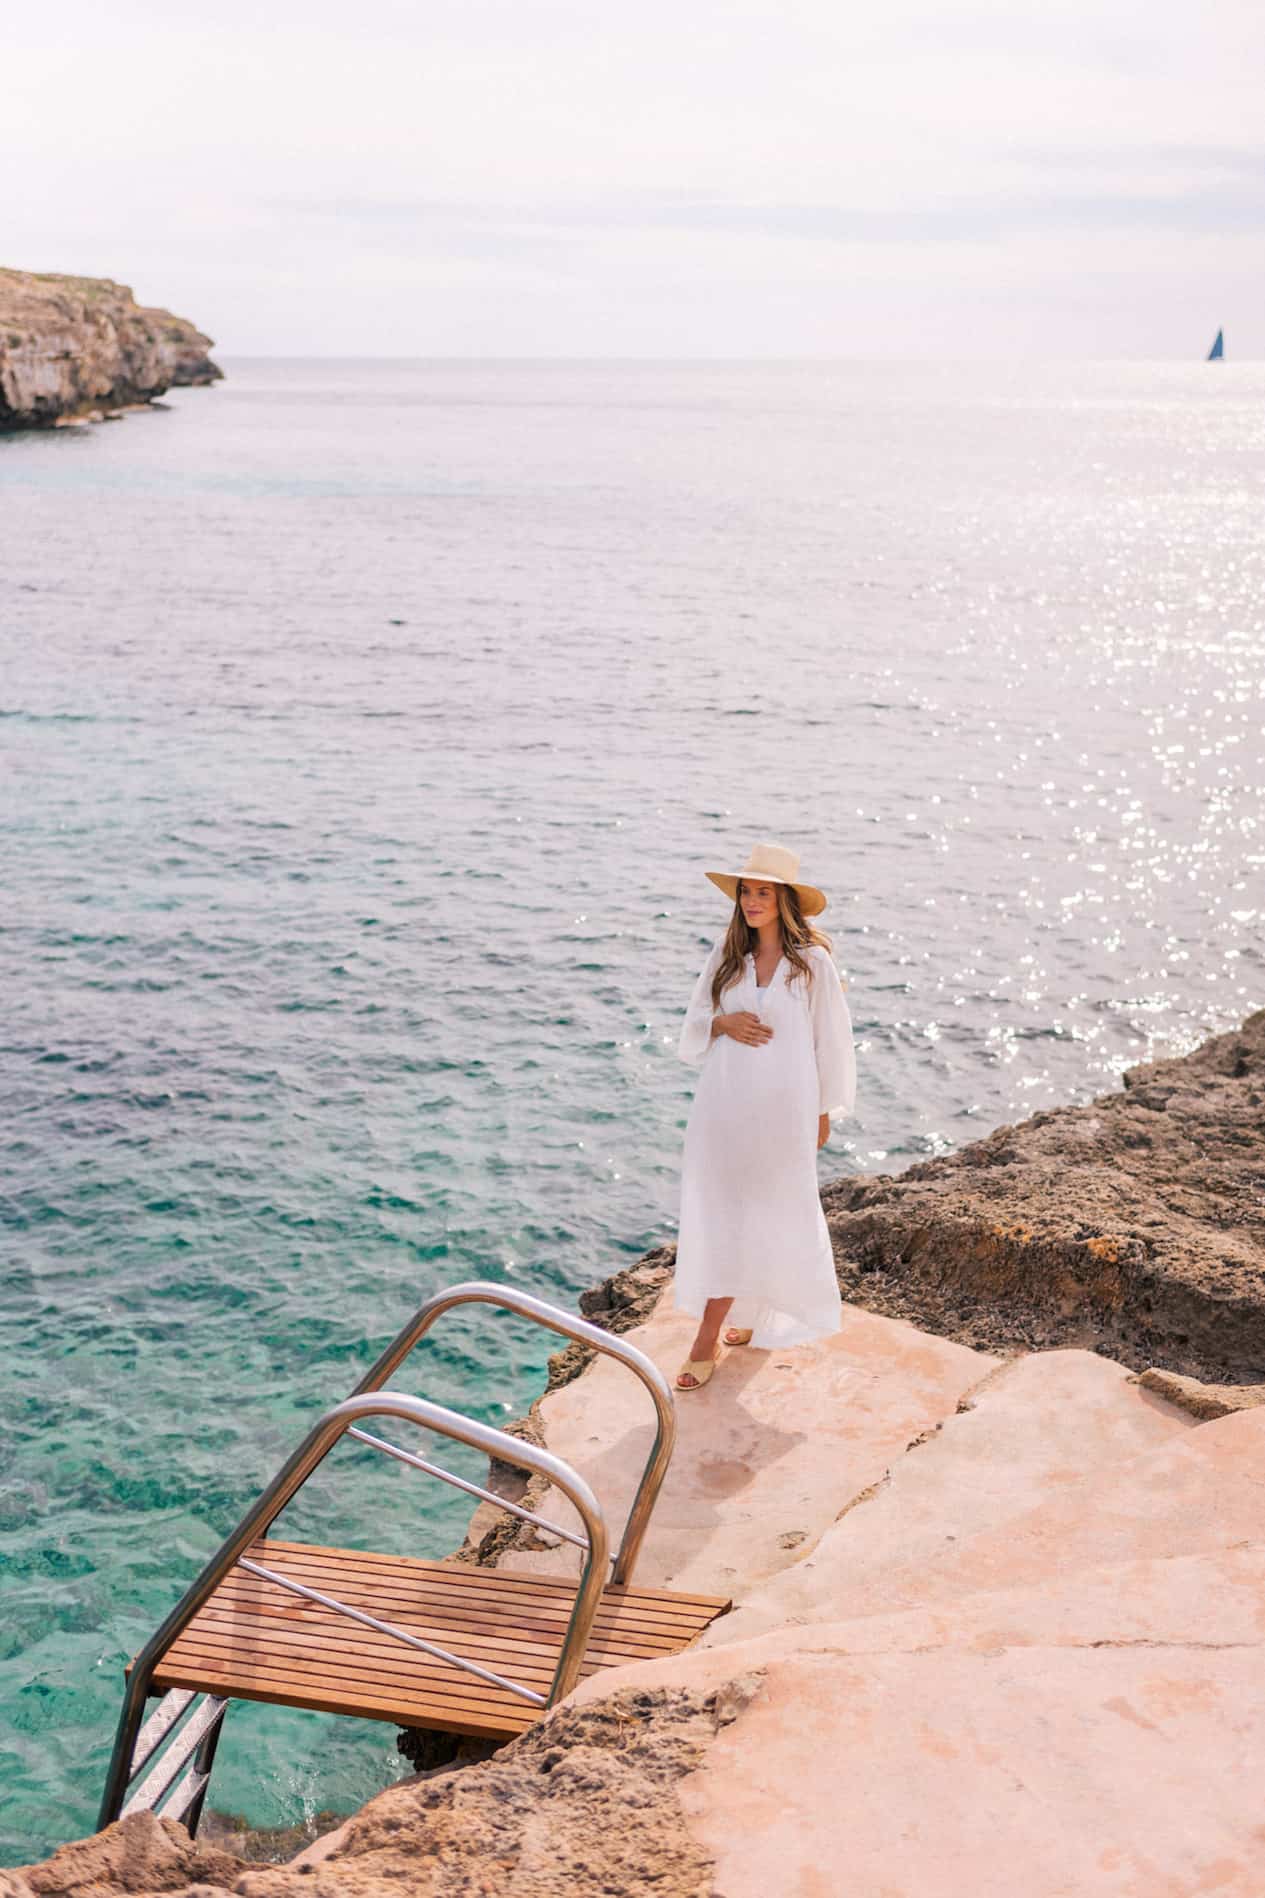 image of a woman from a distance standing in front of an ocean cliff wearing a white kaftan and a sun hat, she is pregnant